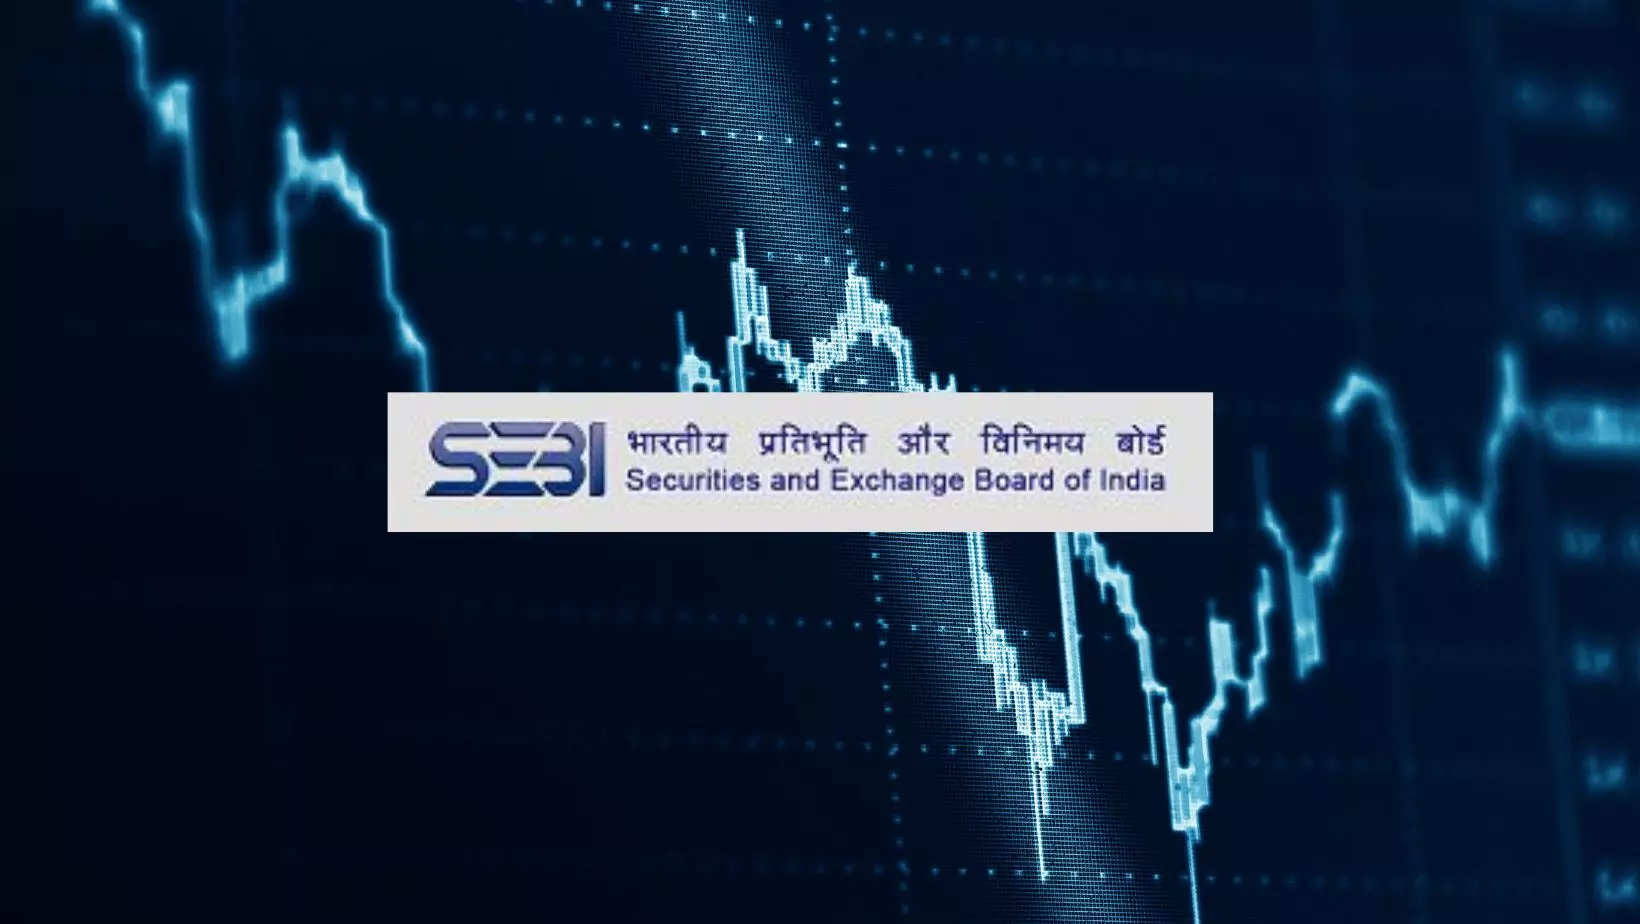 SEBI to move to instant settlement in two phases